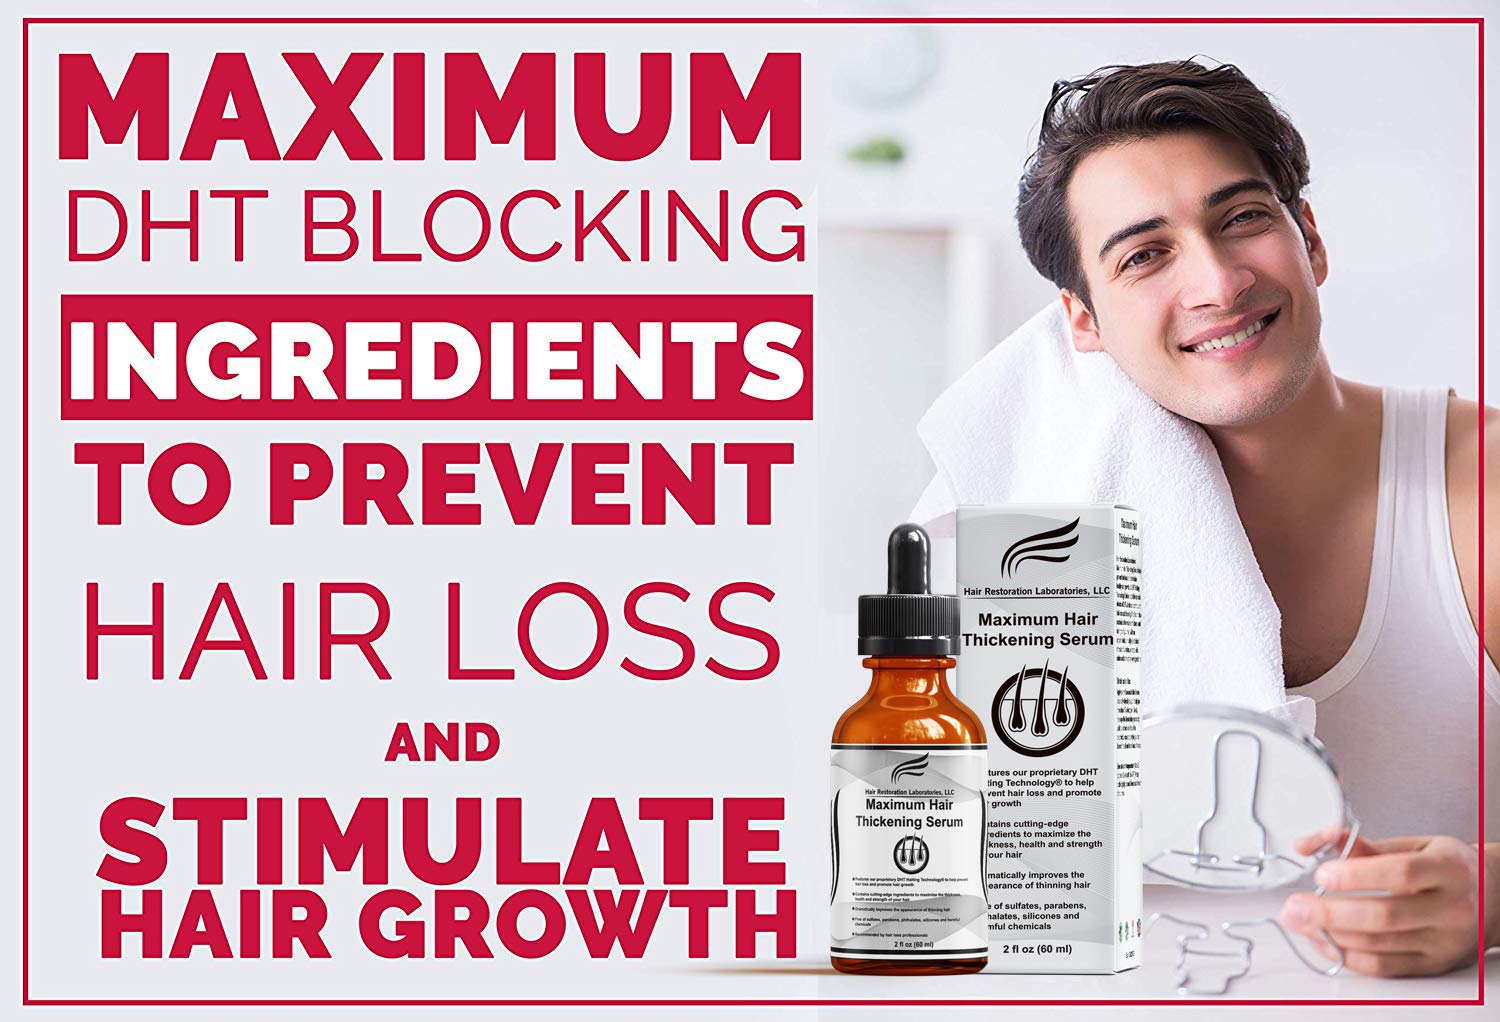 Hair Restoration Laboratories Maximum Hair Thickening Serum, Contains Powerful DHT Blocking Ingredients to Prevent Hair Loss with Instant Results, Hair Regrowth Treatment for Men and Women, 2 fl oz